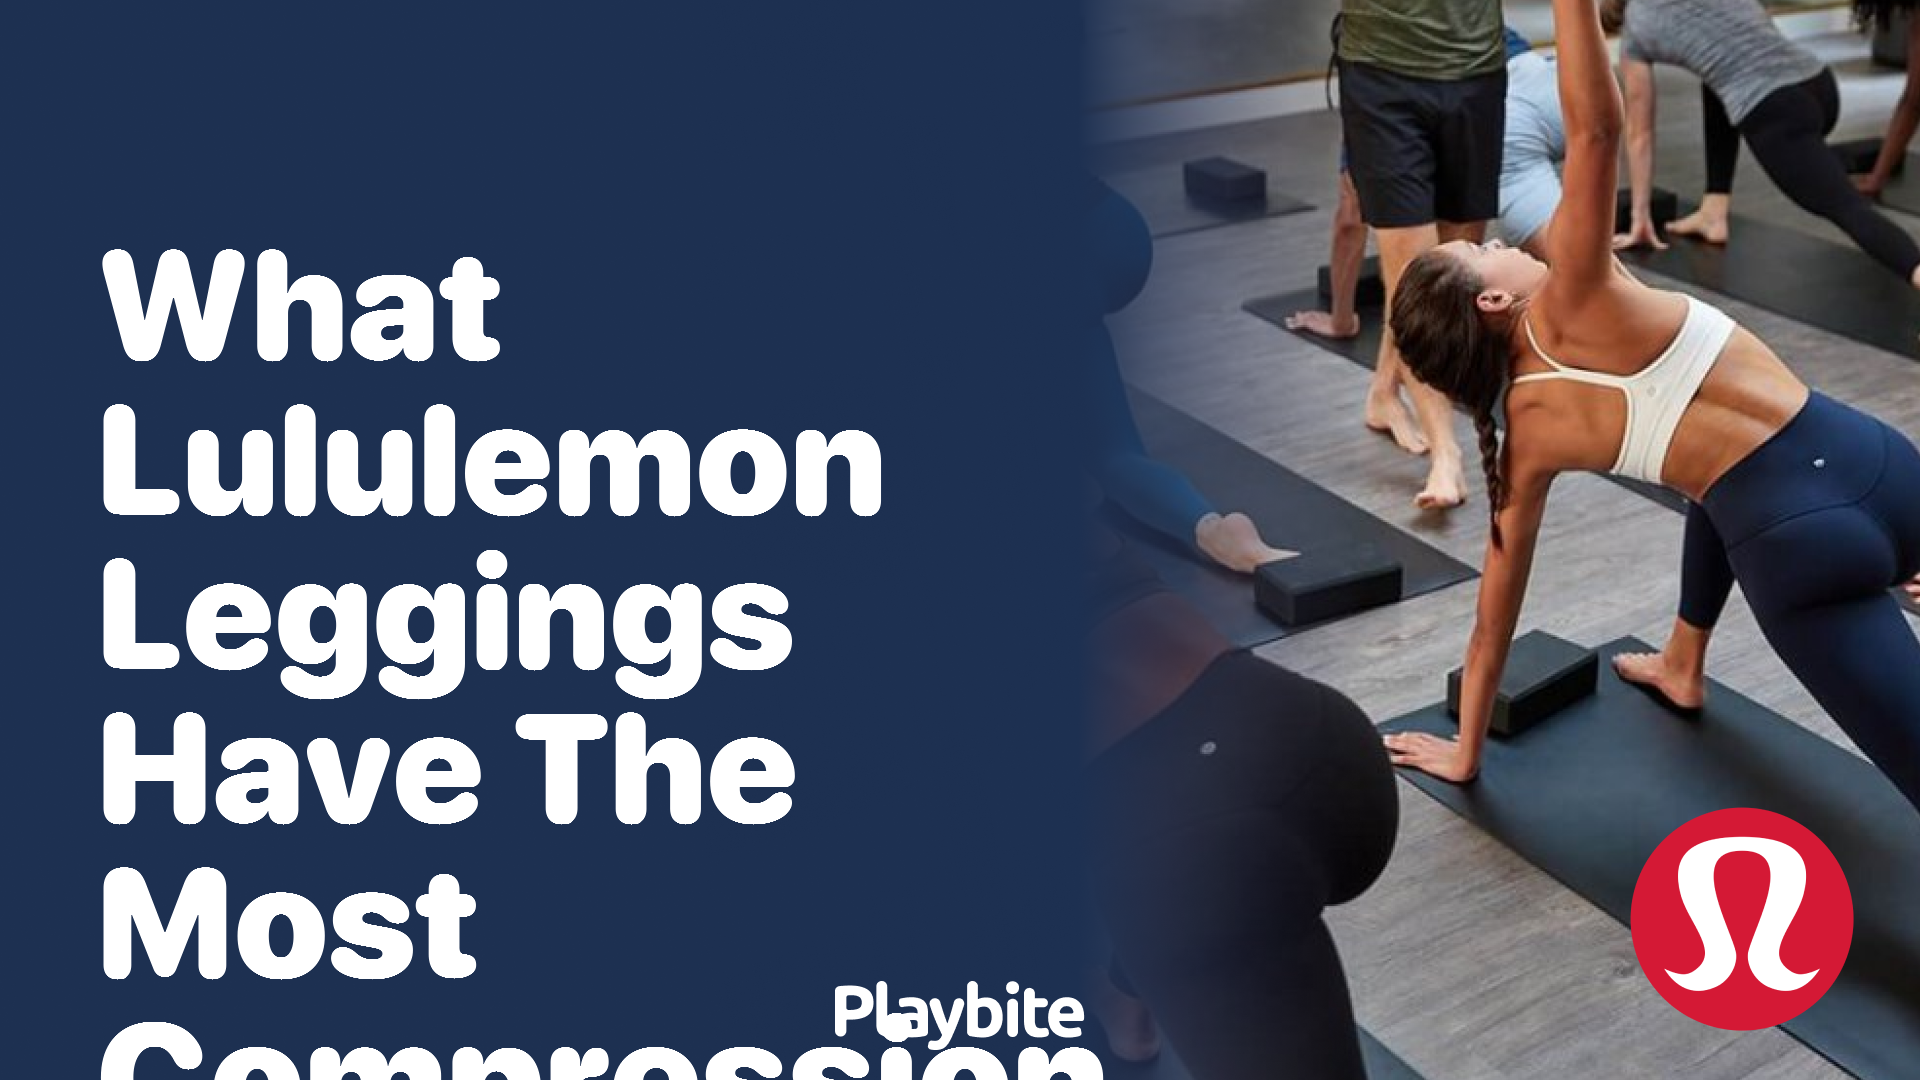 What is the Difference Between Lululemon Tights and Leggings? - Playbite